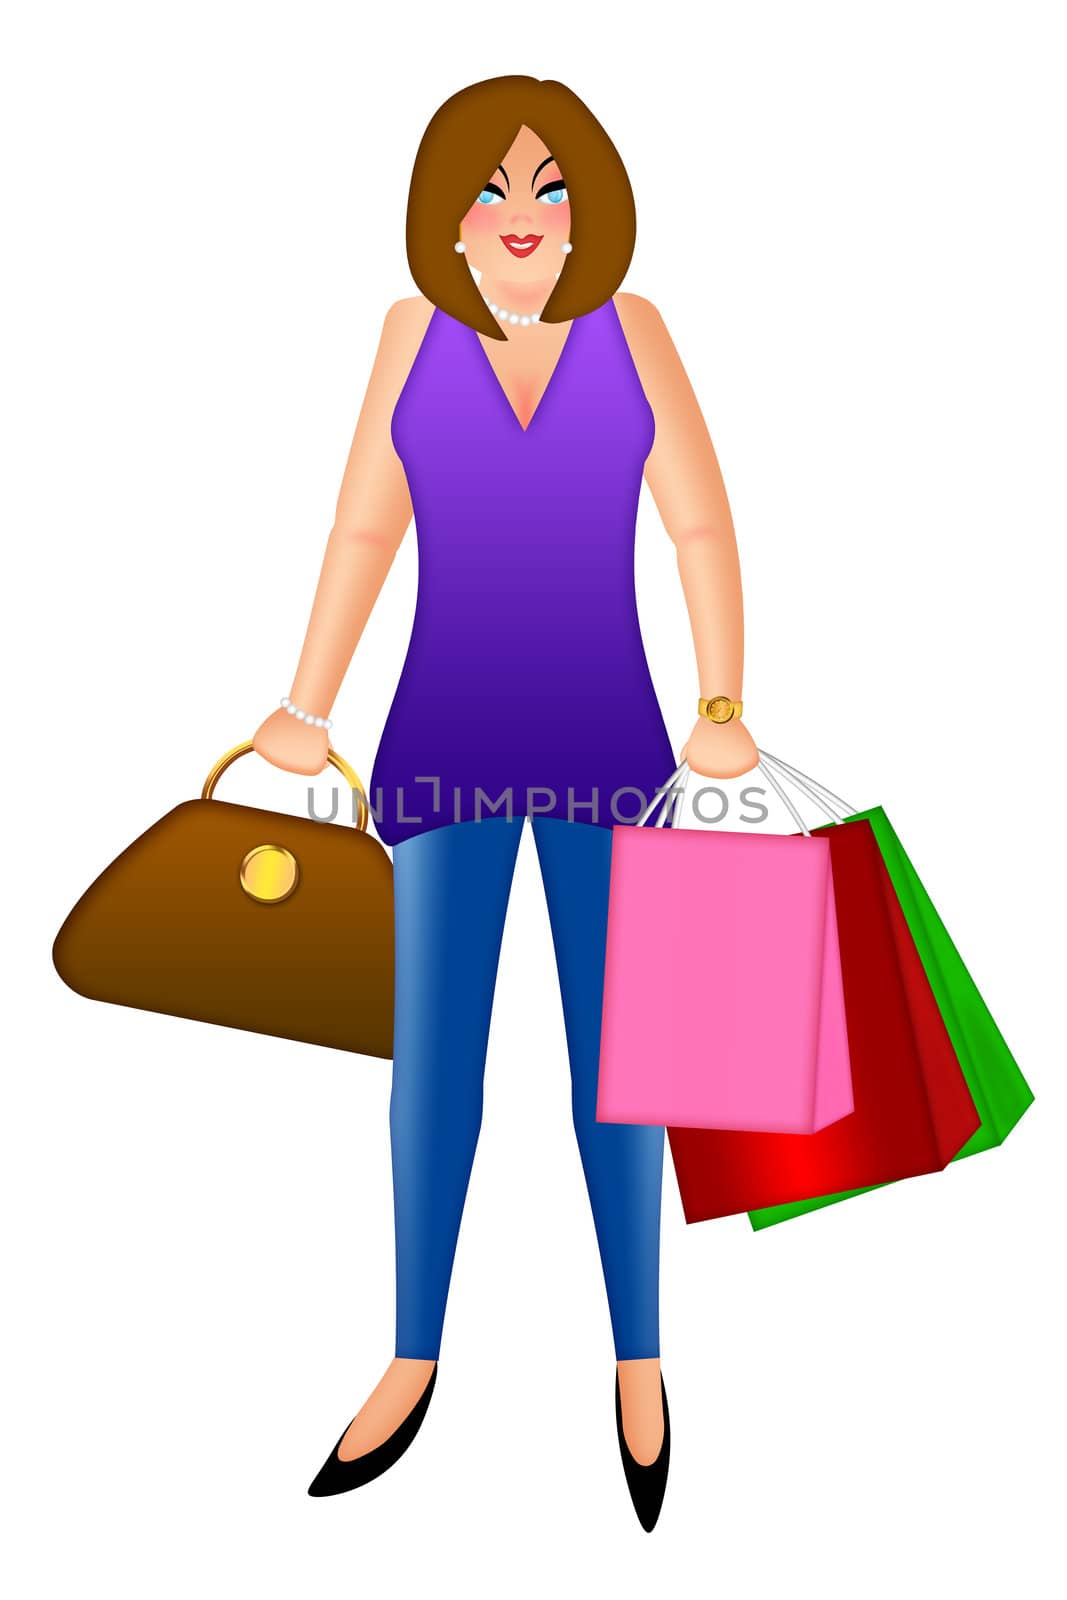 Woman with Shopping Bags and Handbag Purse Illustration Isolated on White